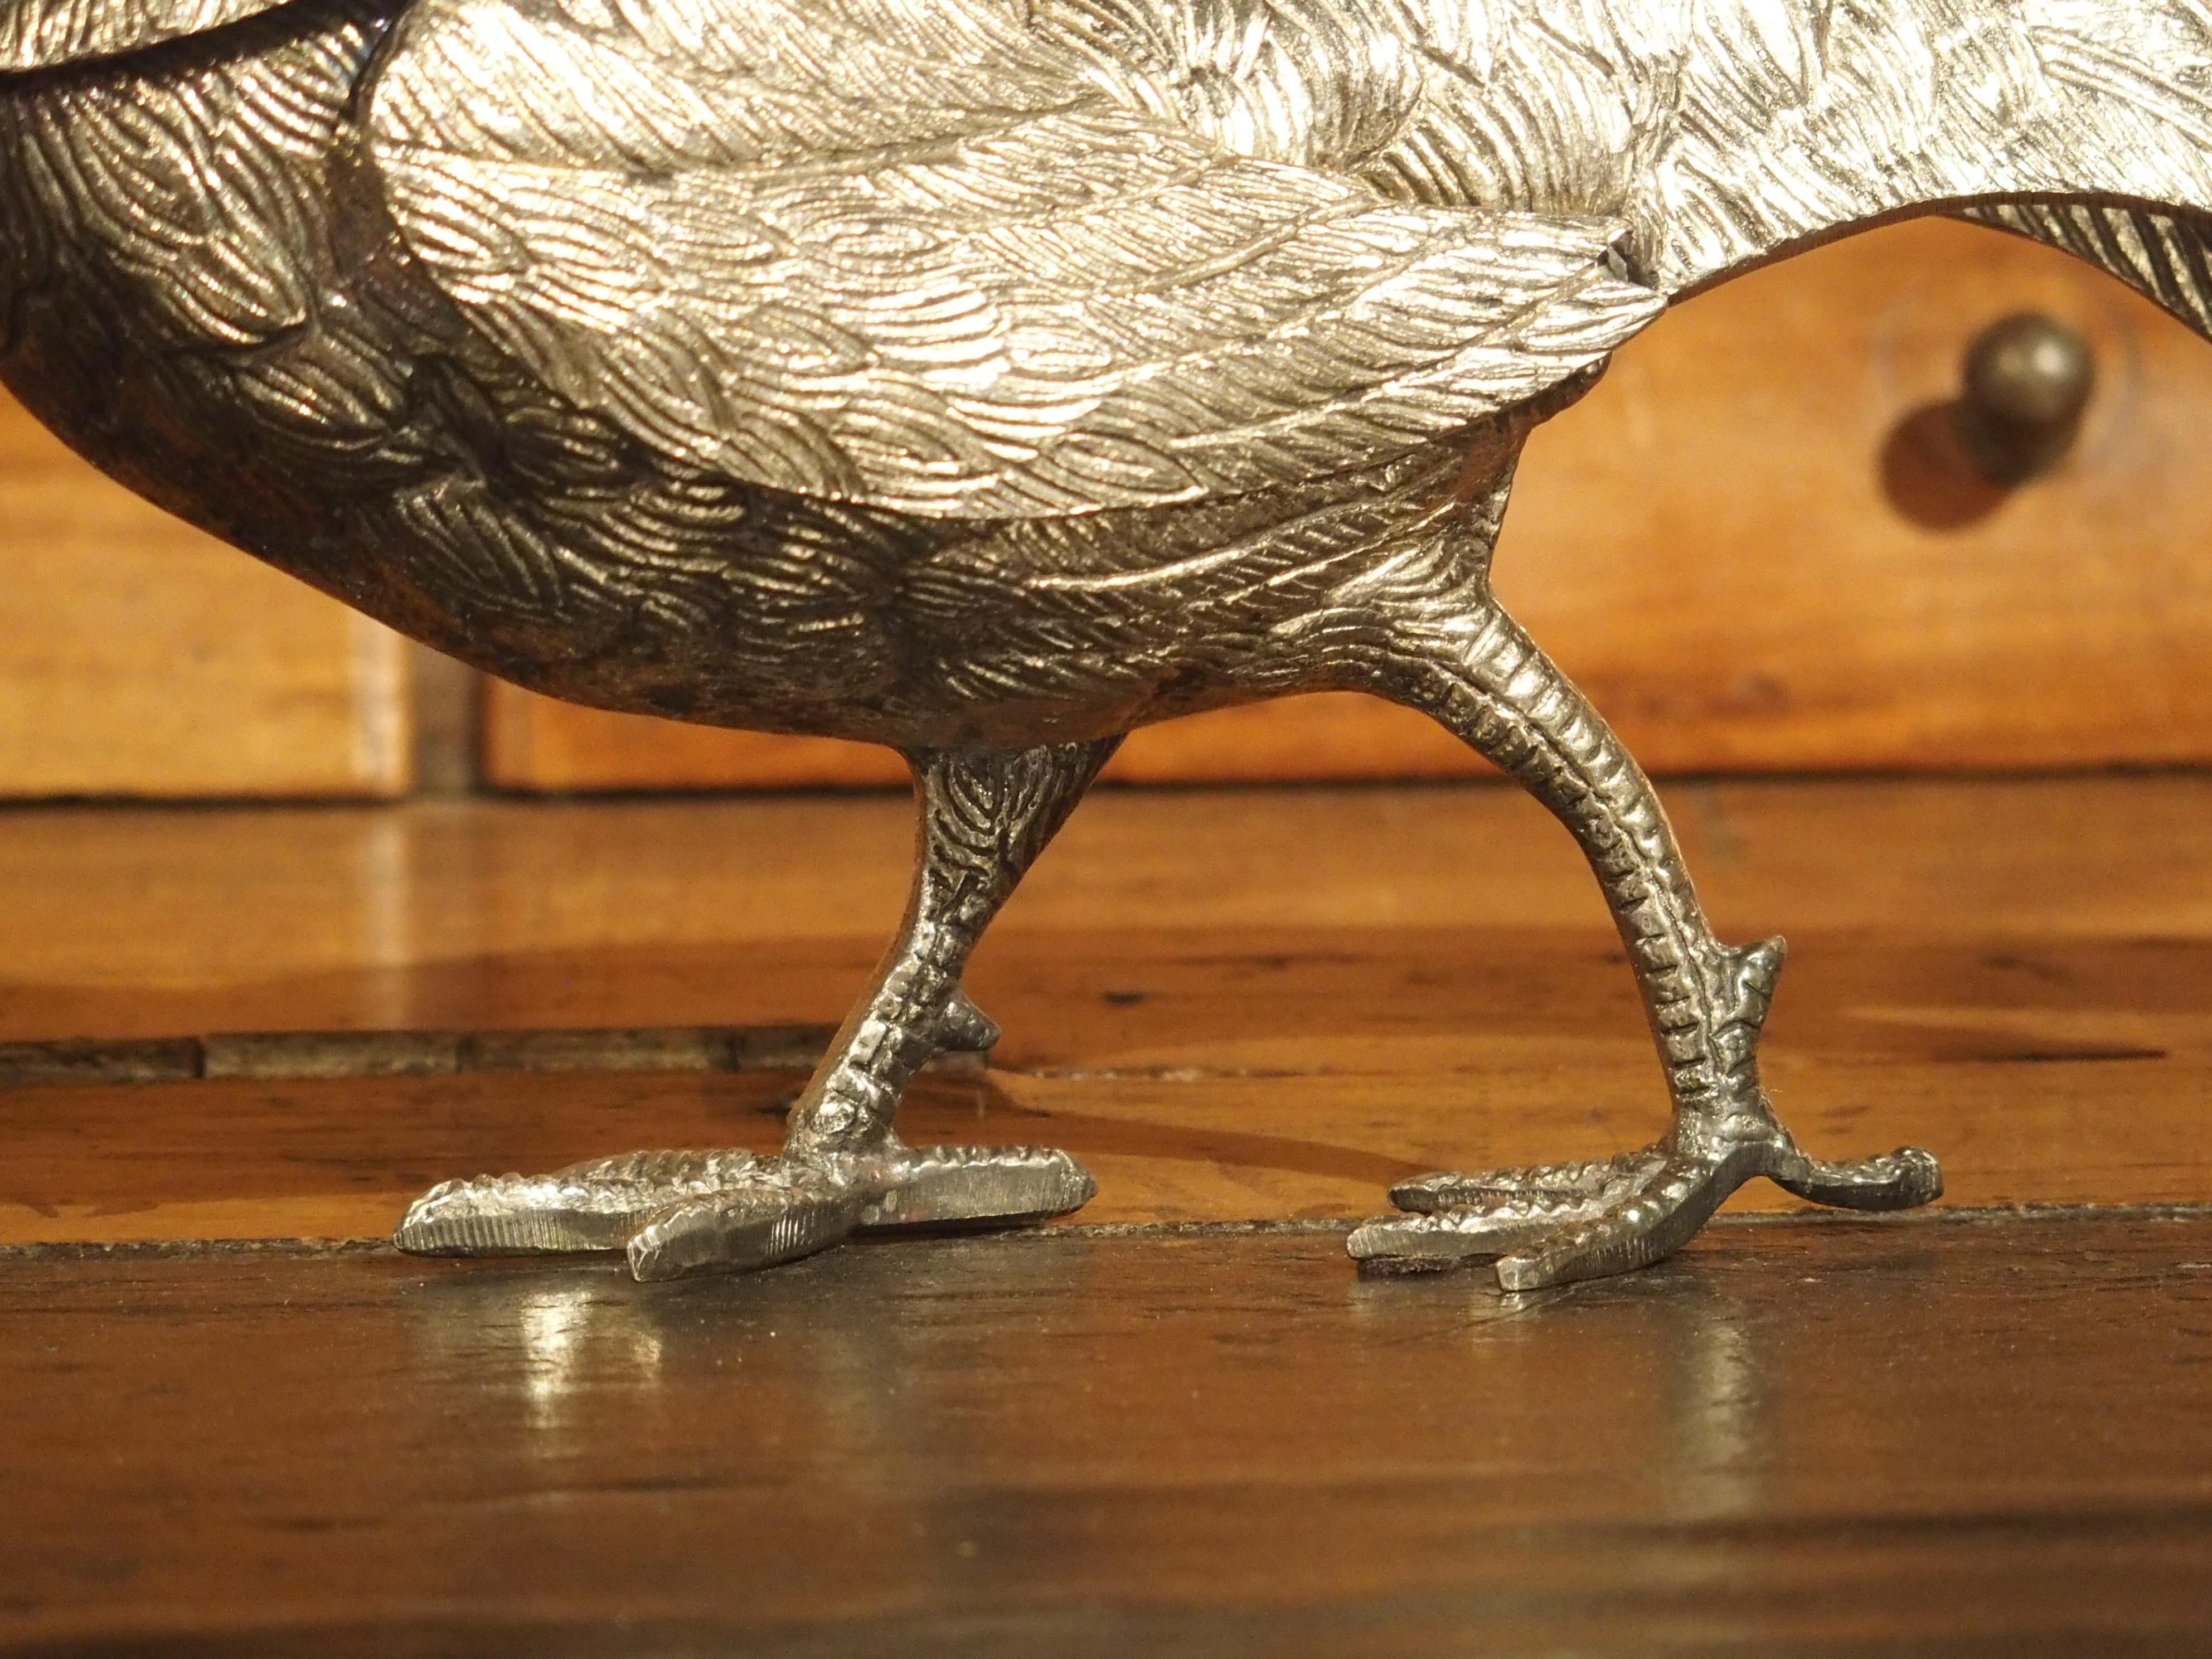 20th Century Pair of Decorative Silvered Pheasant Statues from France